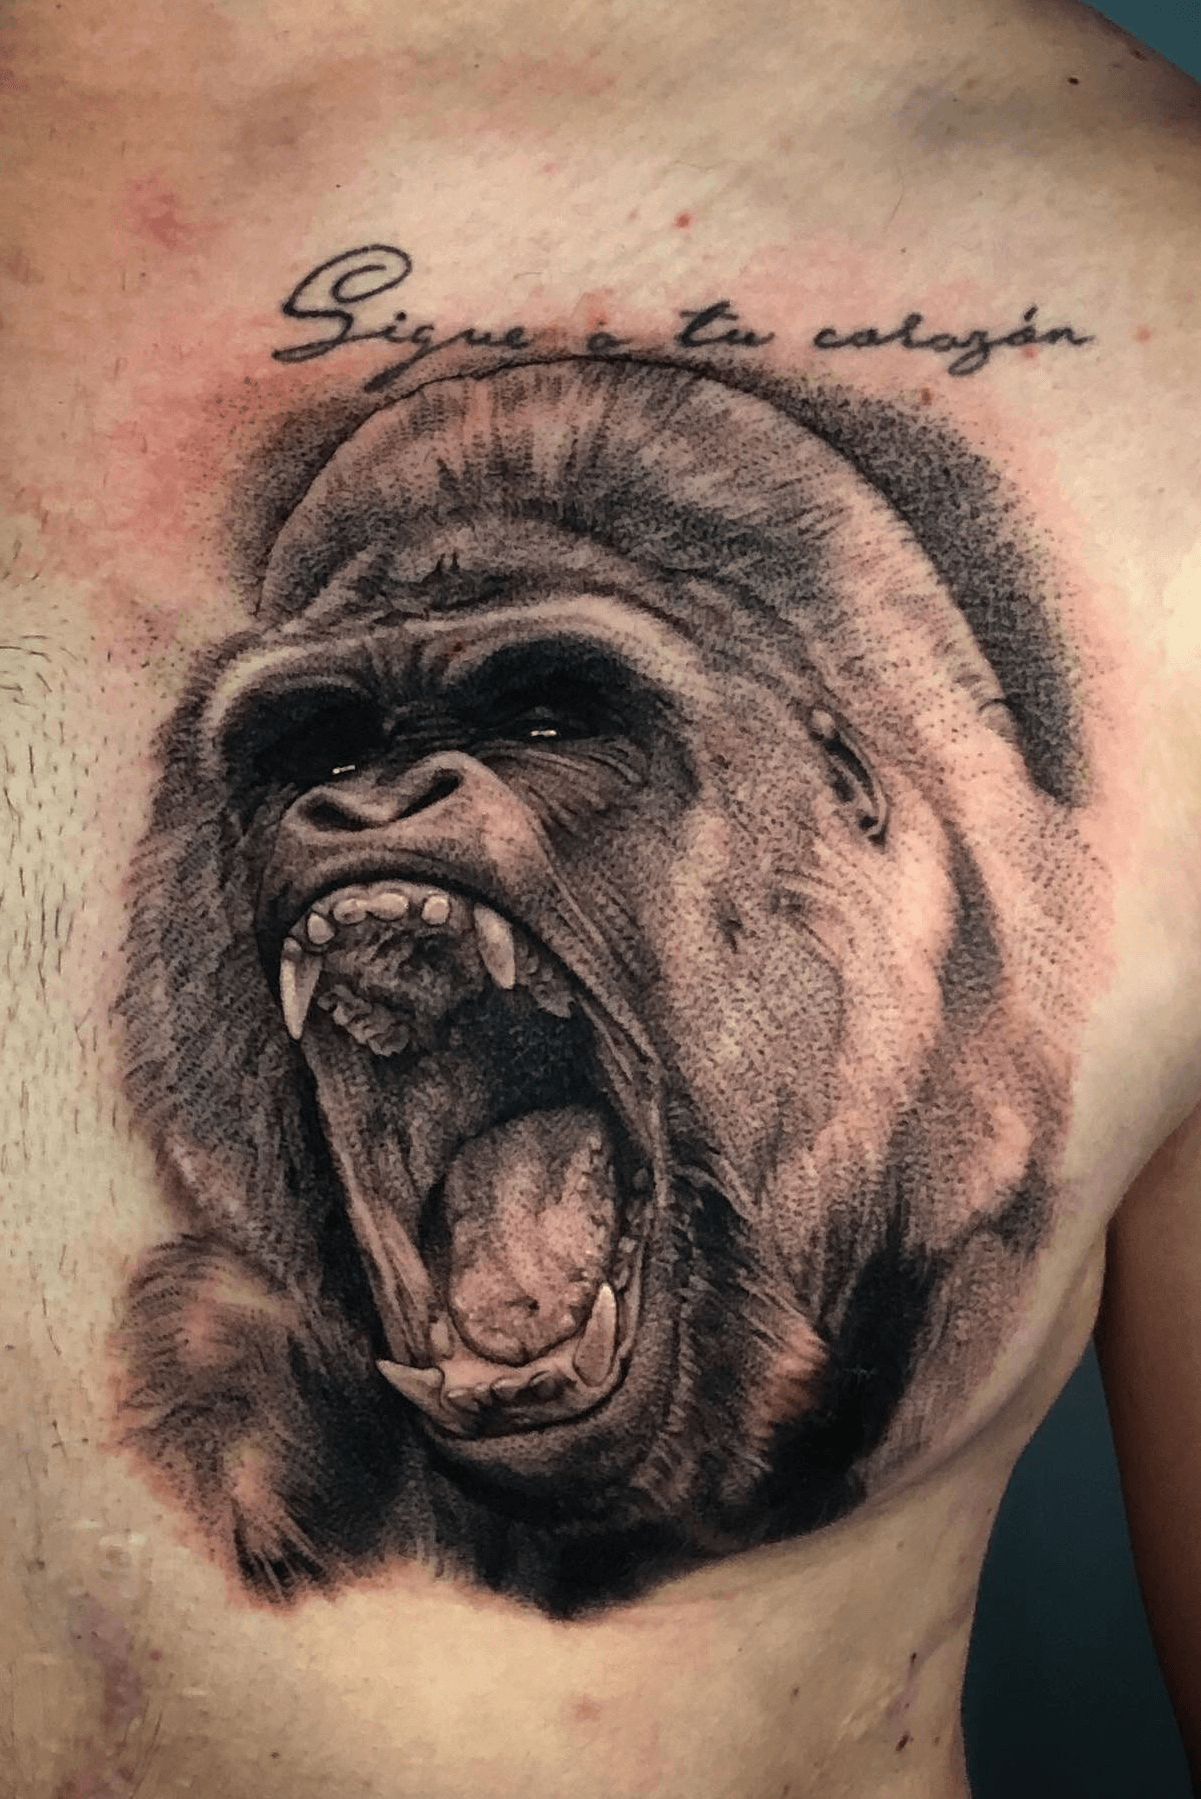 Devils Own Tattoos ar Twitter Fantastic black and grey realistic style  gorilla to the chest combined with a snake in the reeds further towards  the shoulder by Thrax httpstcoAmtPmuOywh  Twitter